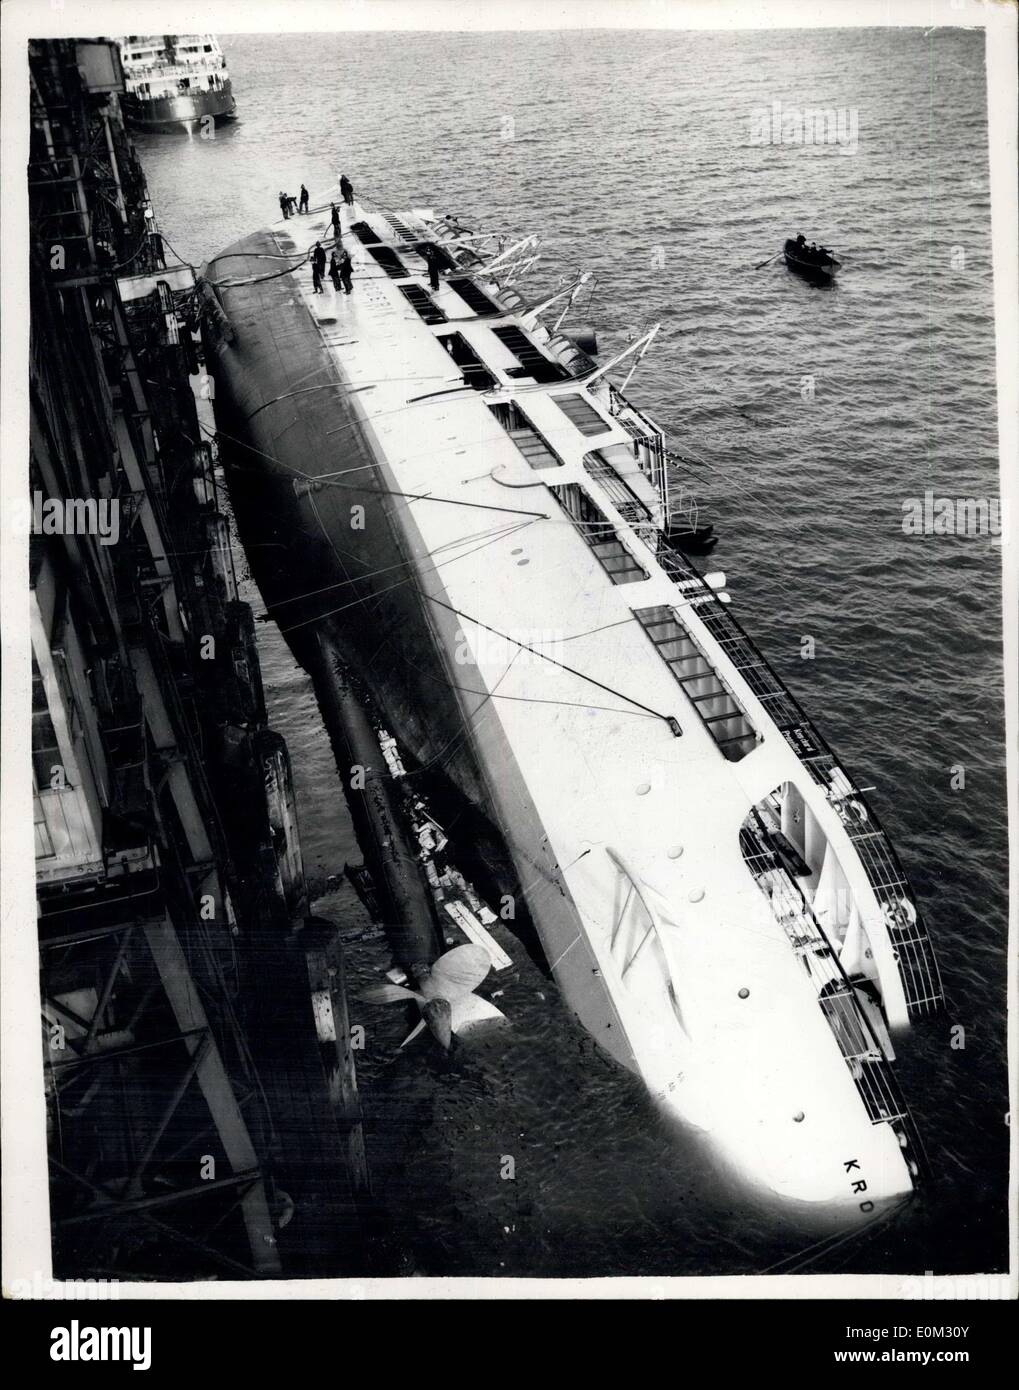 Apr. 20, 1953 - Danish Vesel ''Kronprins Frederik'' Capsizes after Burning All Night Long. The Danish passenger ship ''Kronprins Frederik'' capsized this morning in her berth at Harwick after fire hade waged in her all night long. Three firemen and two members of the crew were injured. Keystone Photo Shows: View of the ''Kronprins Frederik'' still smouldering as she lies on her side in her berth at Harwick this morning. Stock Photo